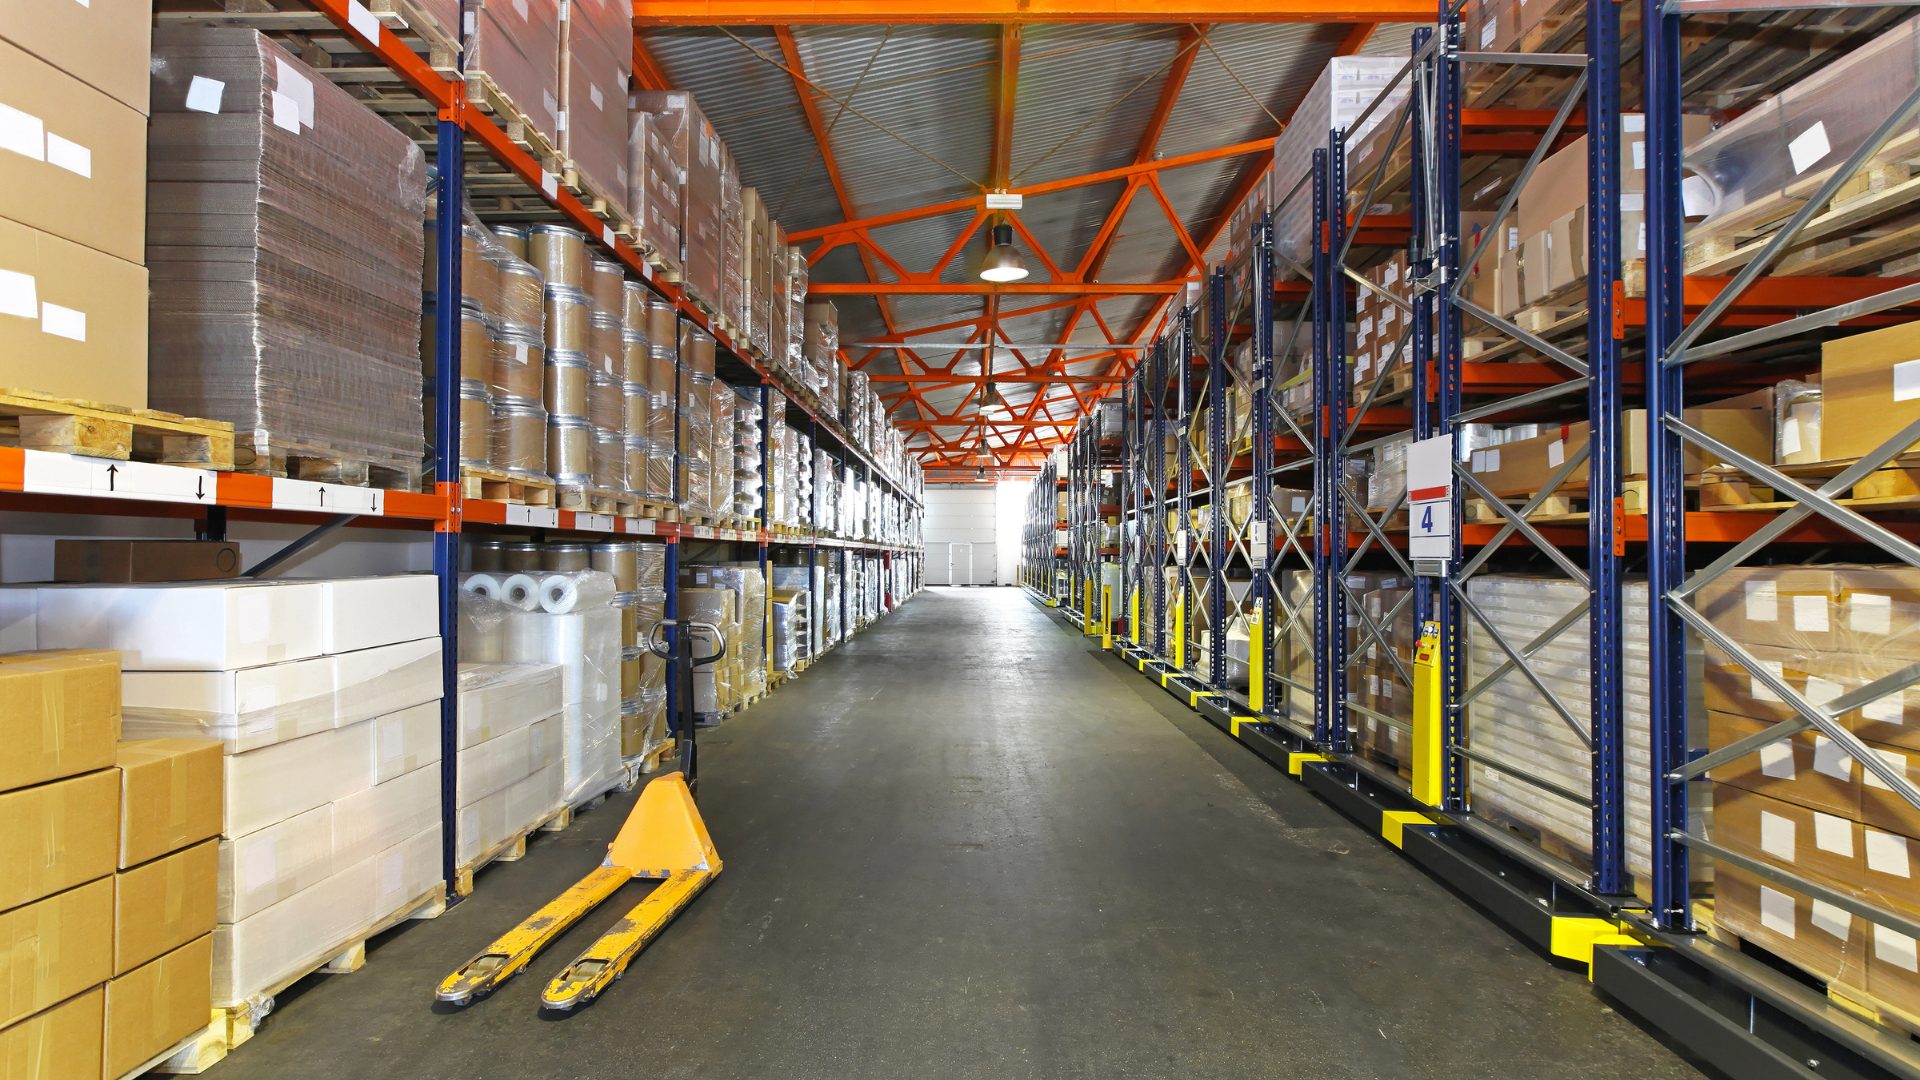 Warehouse Dumbwaiters: The Key to Speeding Up Distribution Center Processes